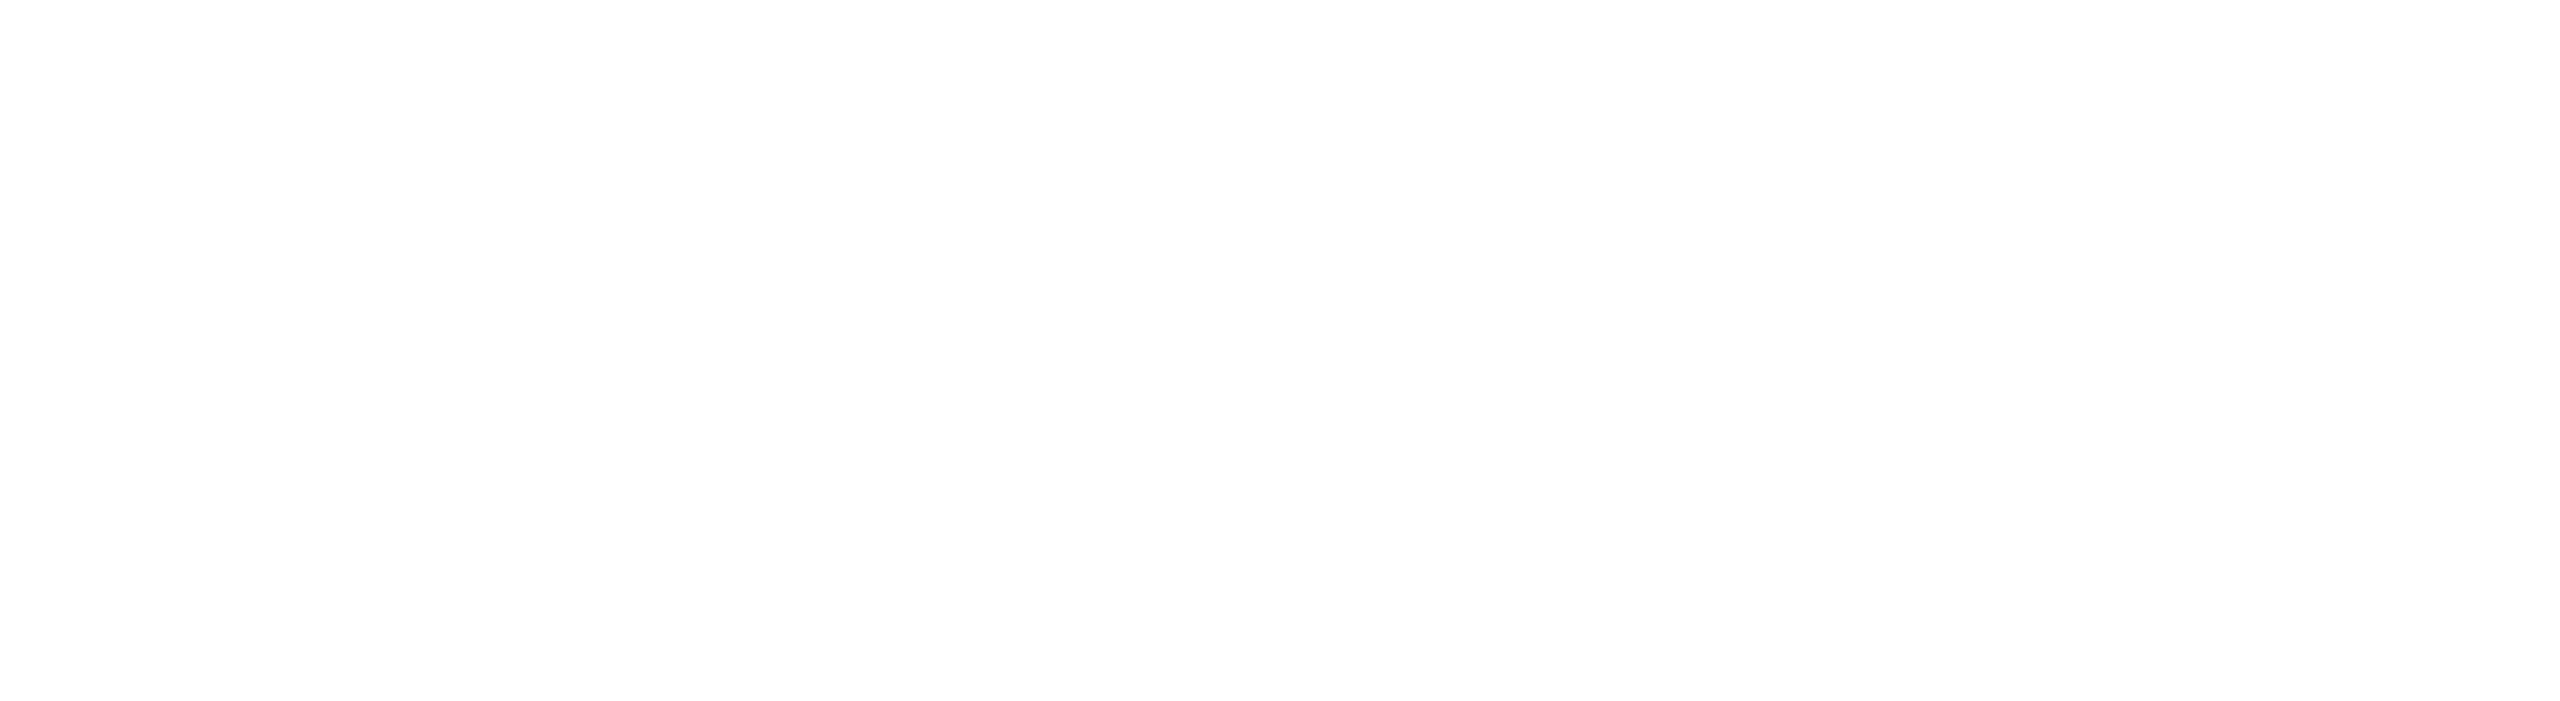 Solutions Expertises